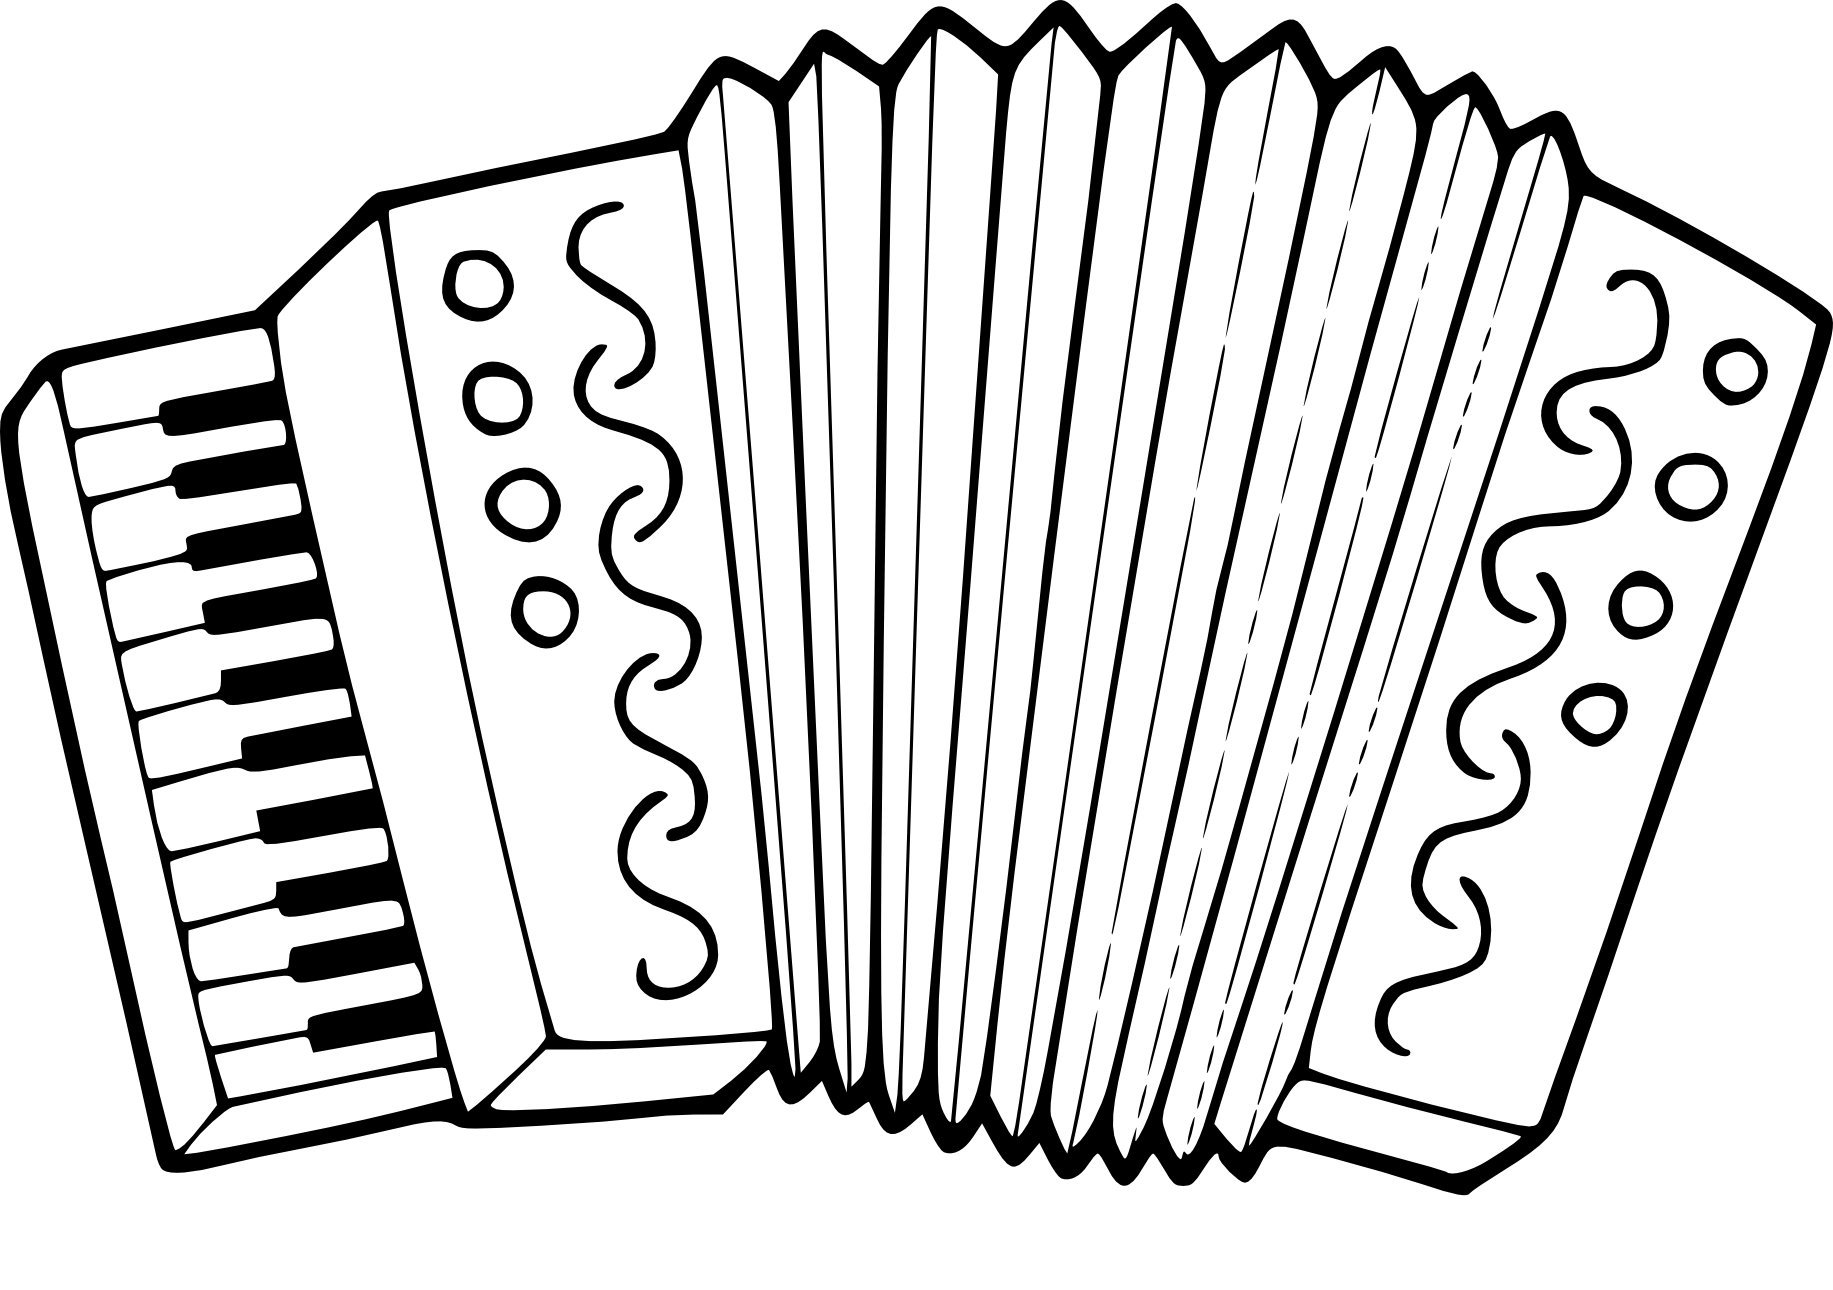 Unique musical instruments for button accordion for babies with labels